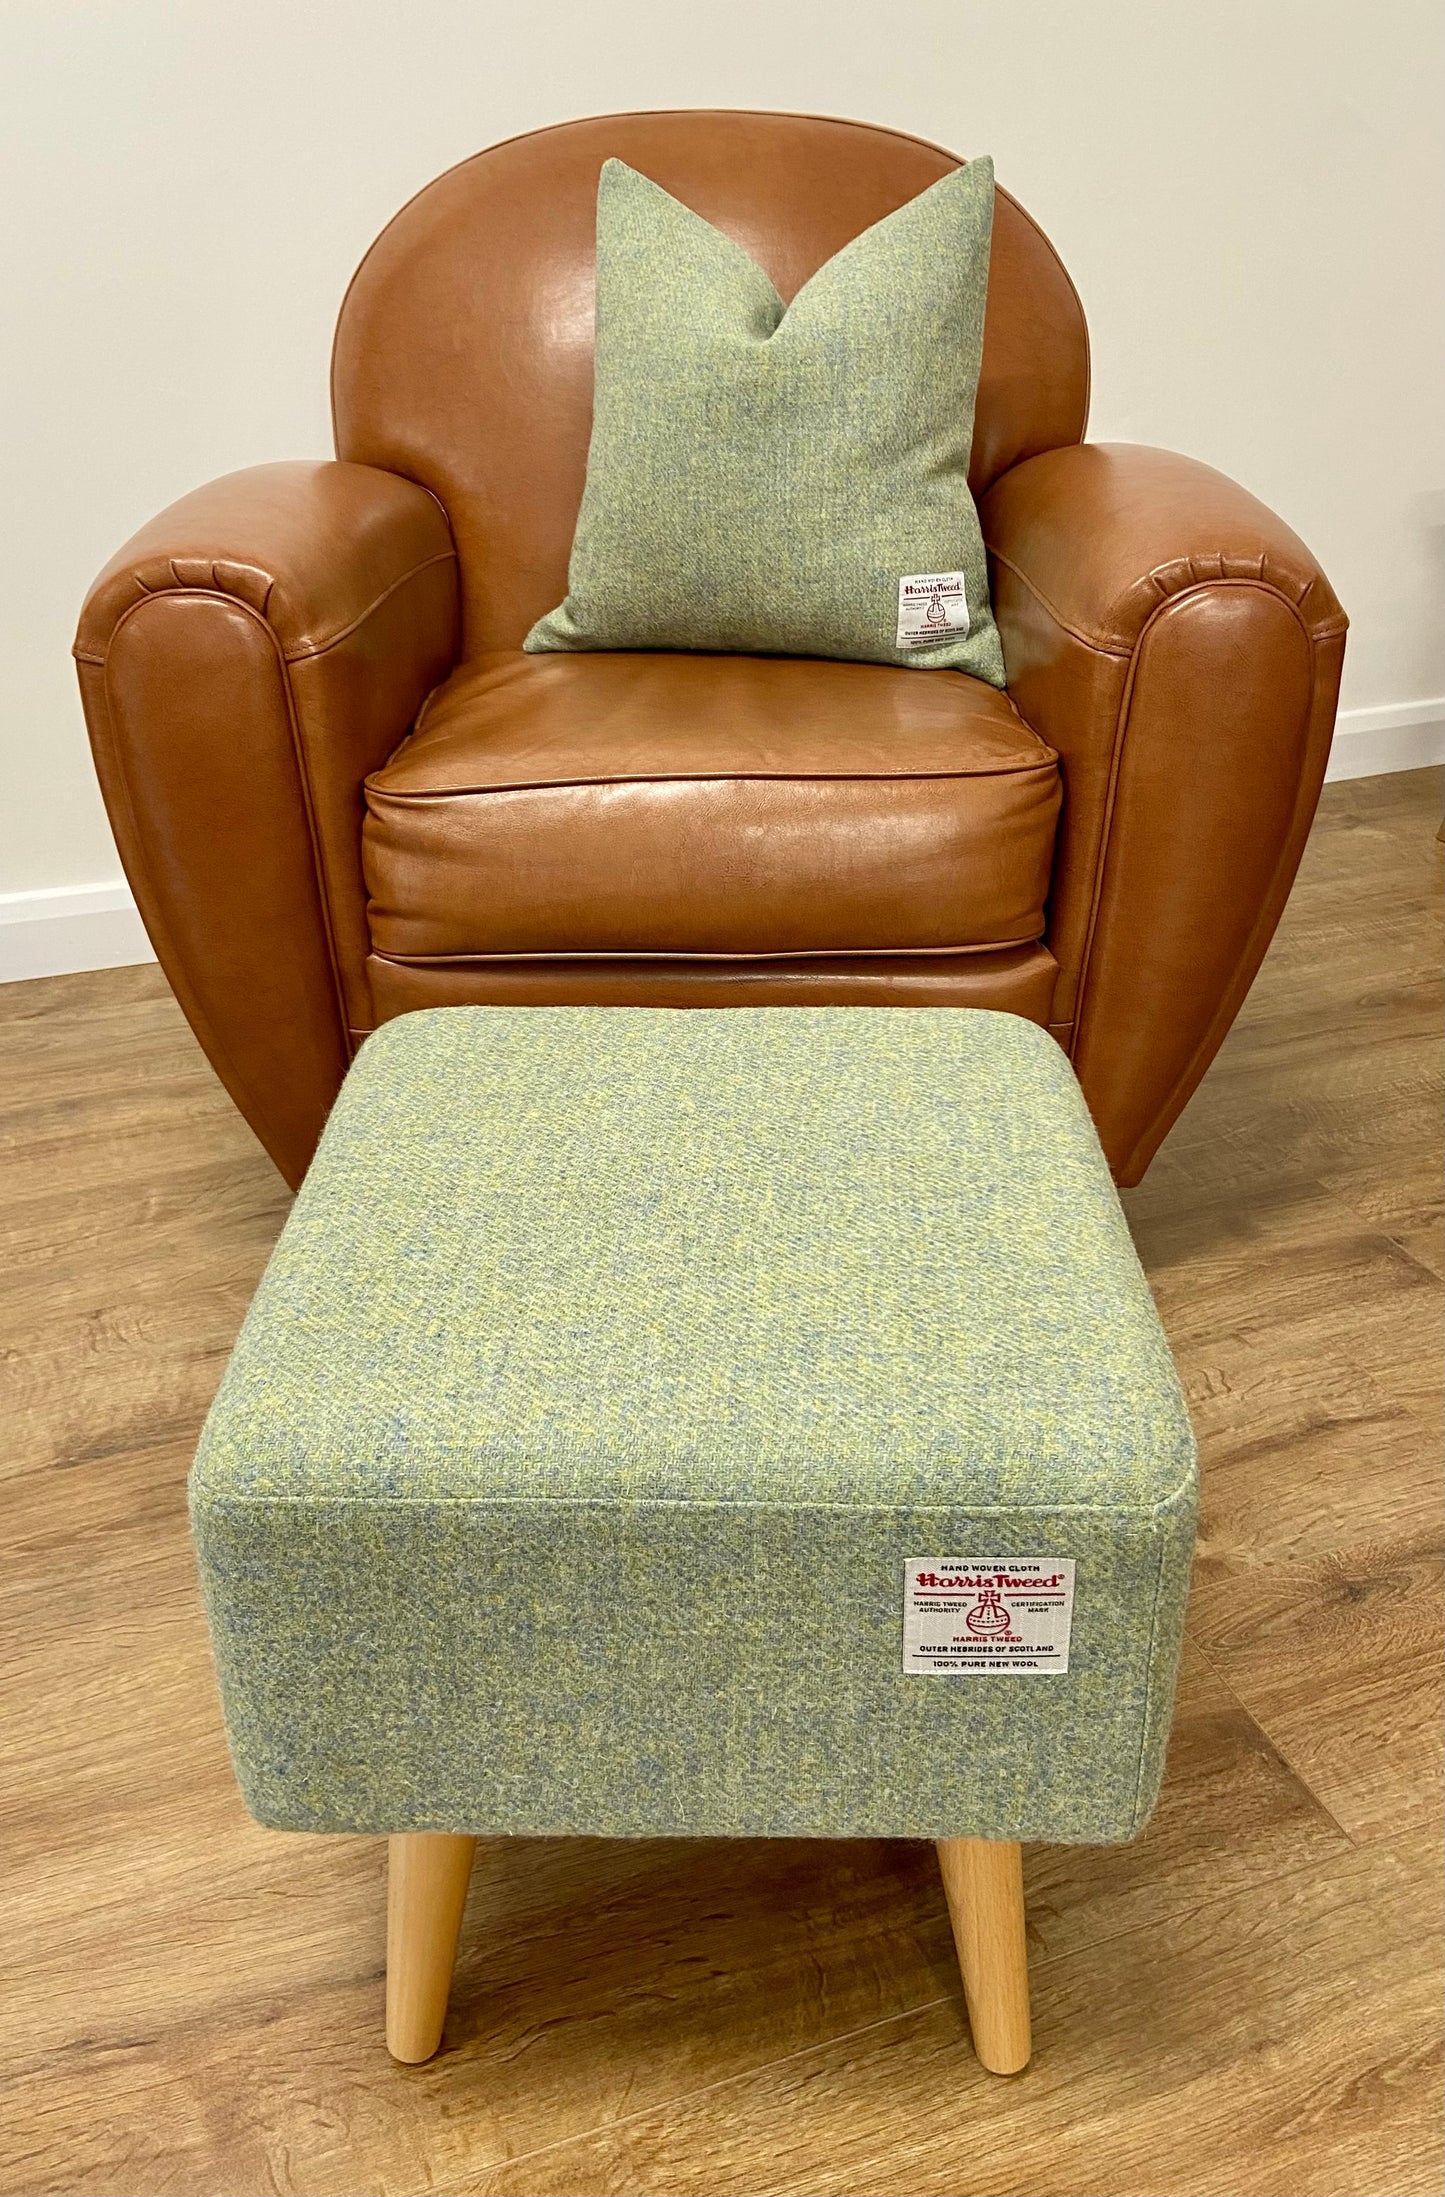 Light Green Square Footstool, Harris Tweed with Varnished Light Wooden Legs